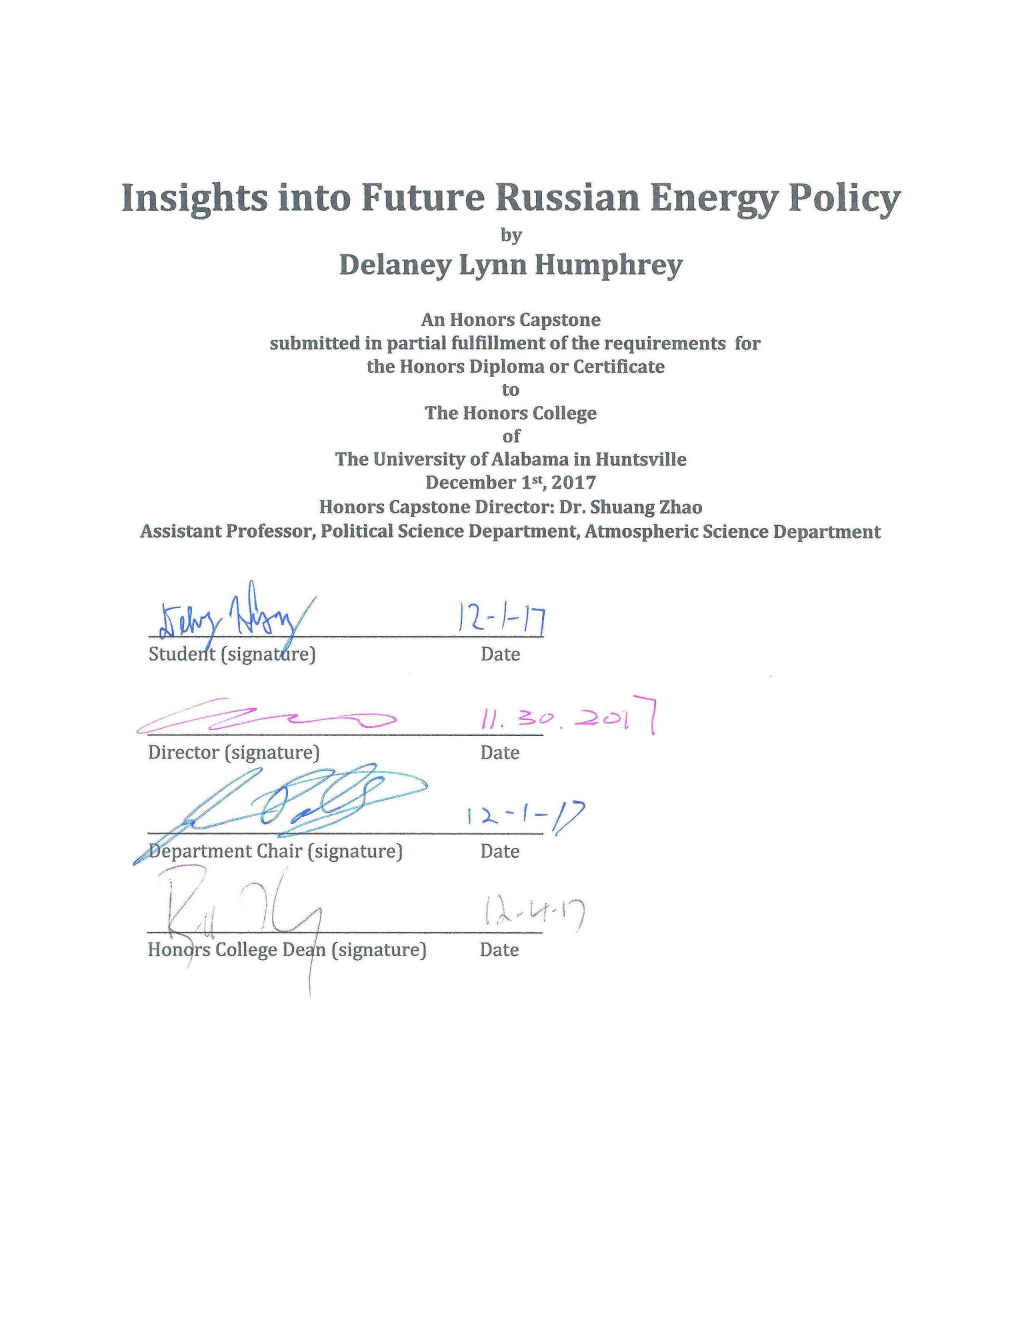 Insights Into Future Russian Energy Policy by Delaney Lynn Humphrey